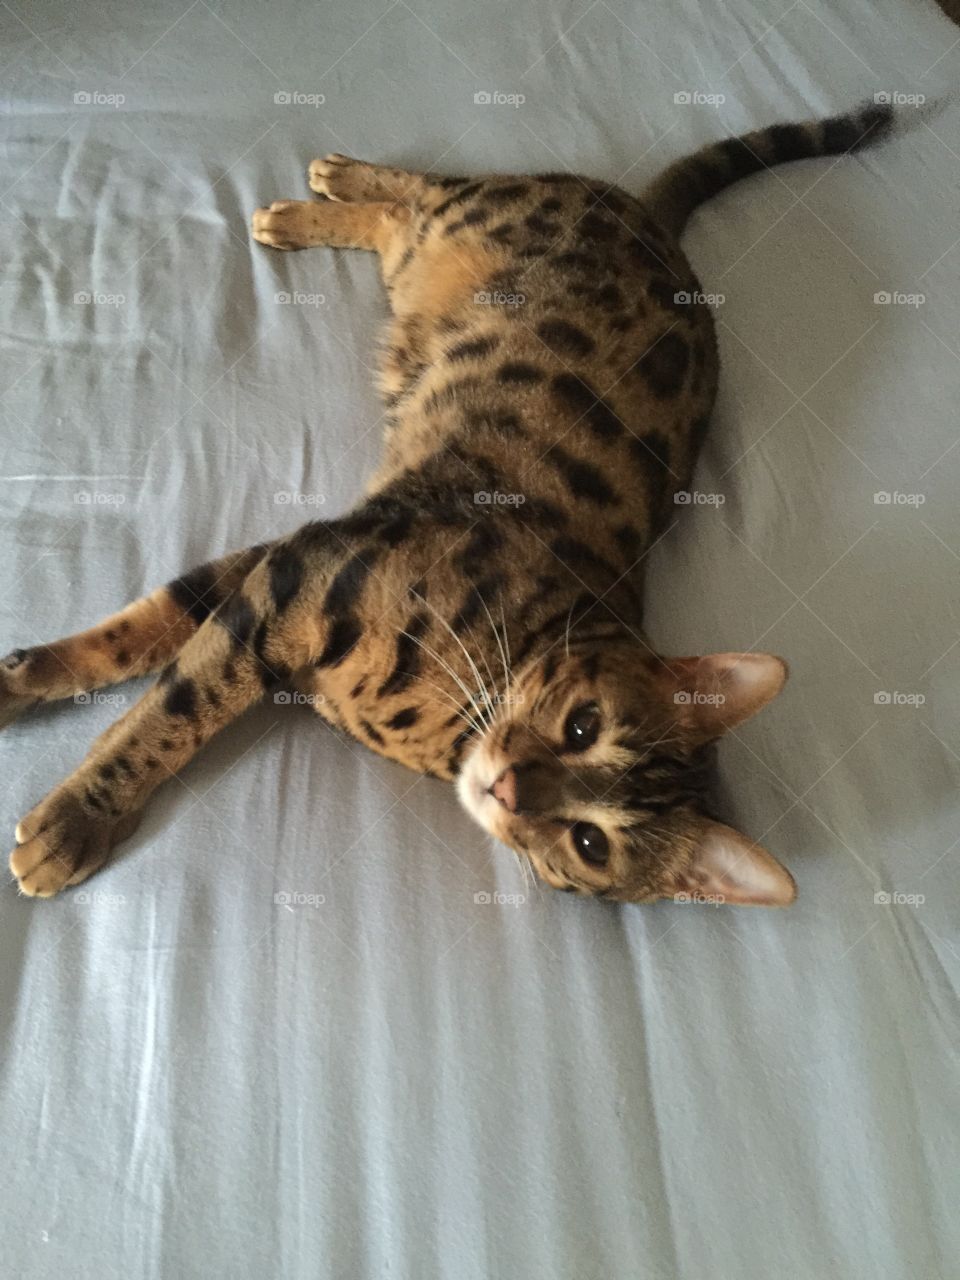 My Bengal cat, Rajah, loves when I put fresh clean sheets on the bed. 